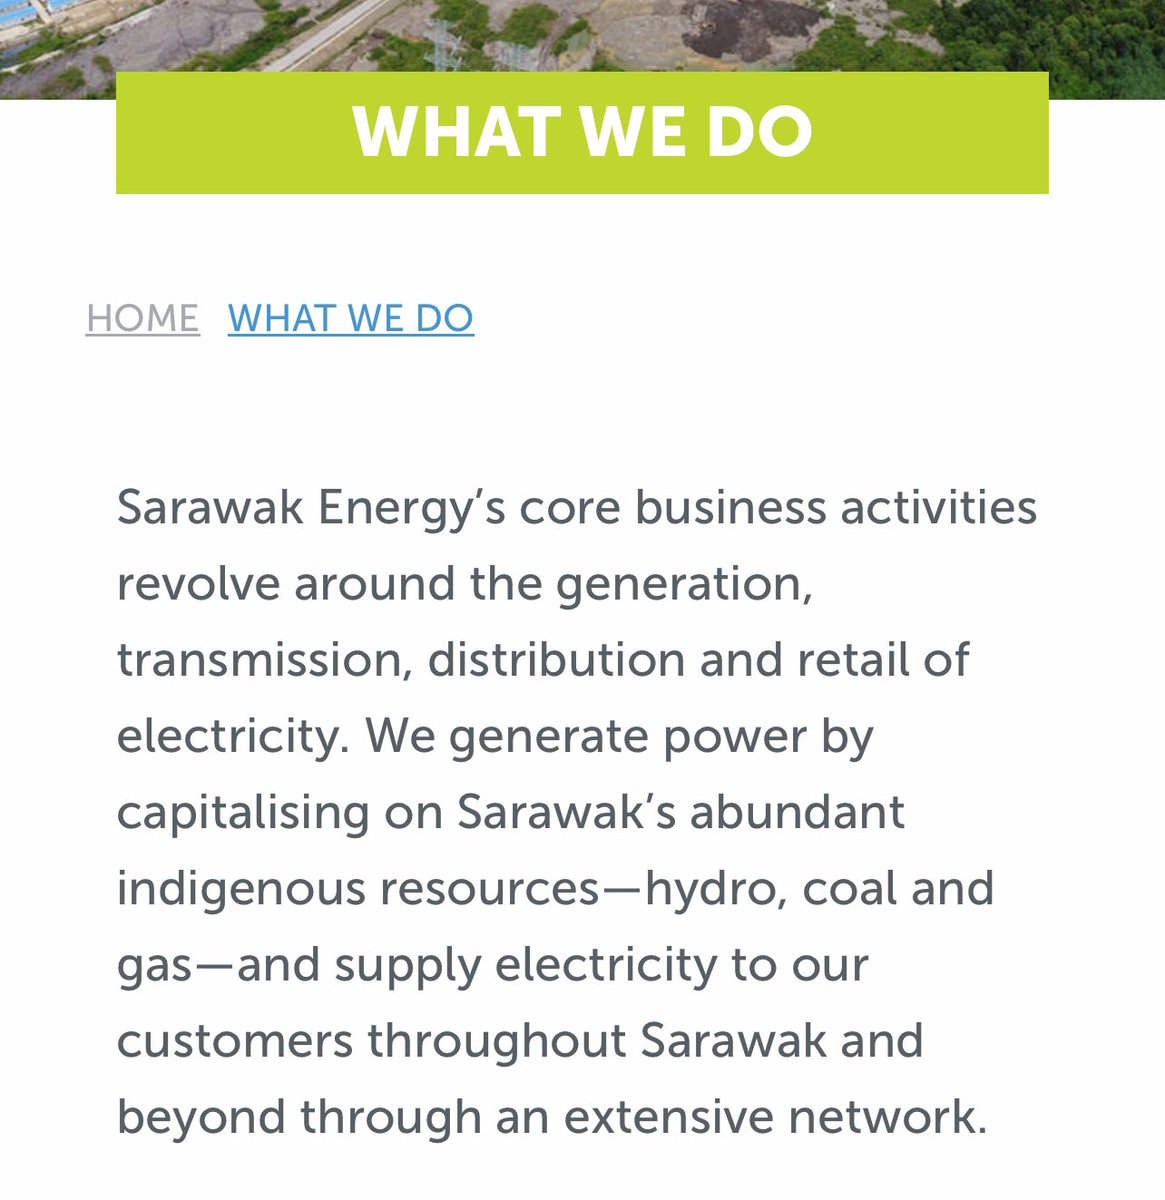 @nbcucatalyst @1SarawakEnergy Hardly what you’d call green energy. Mainly Coal and Gas… 

Let’s see @1SarawakEnergy invest in green energy generation before celebrating. #urbansolar